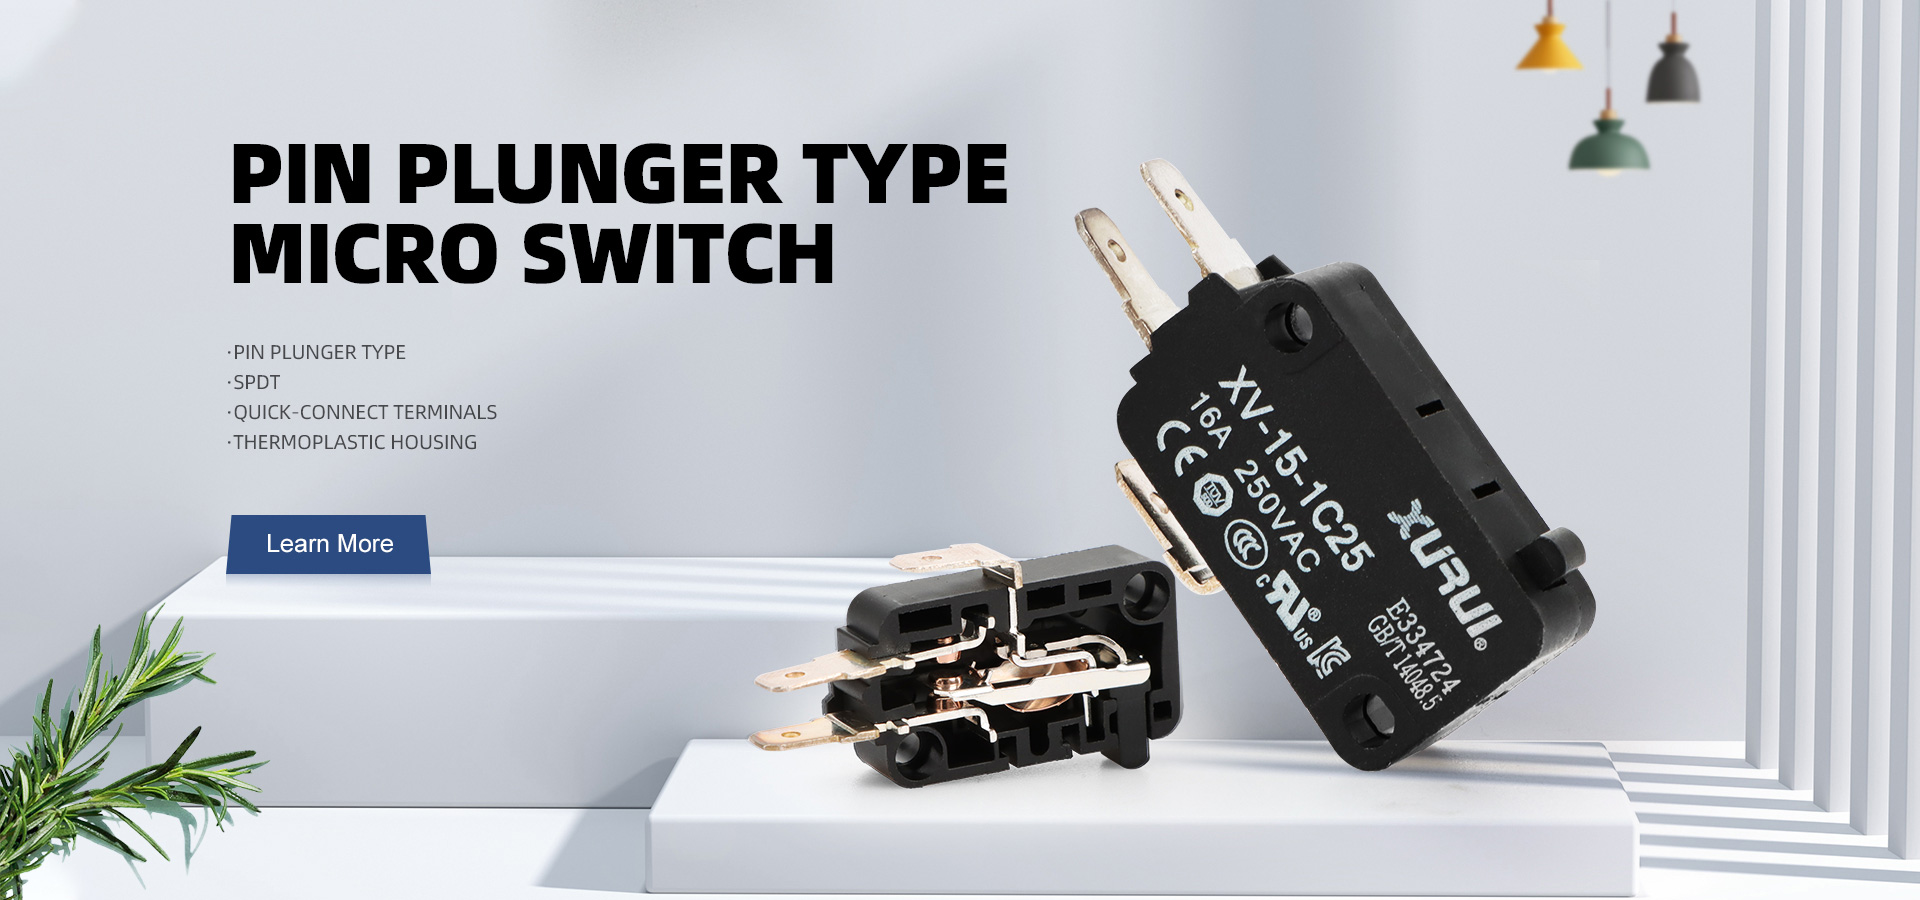 Pin Plungertype Micro Switch